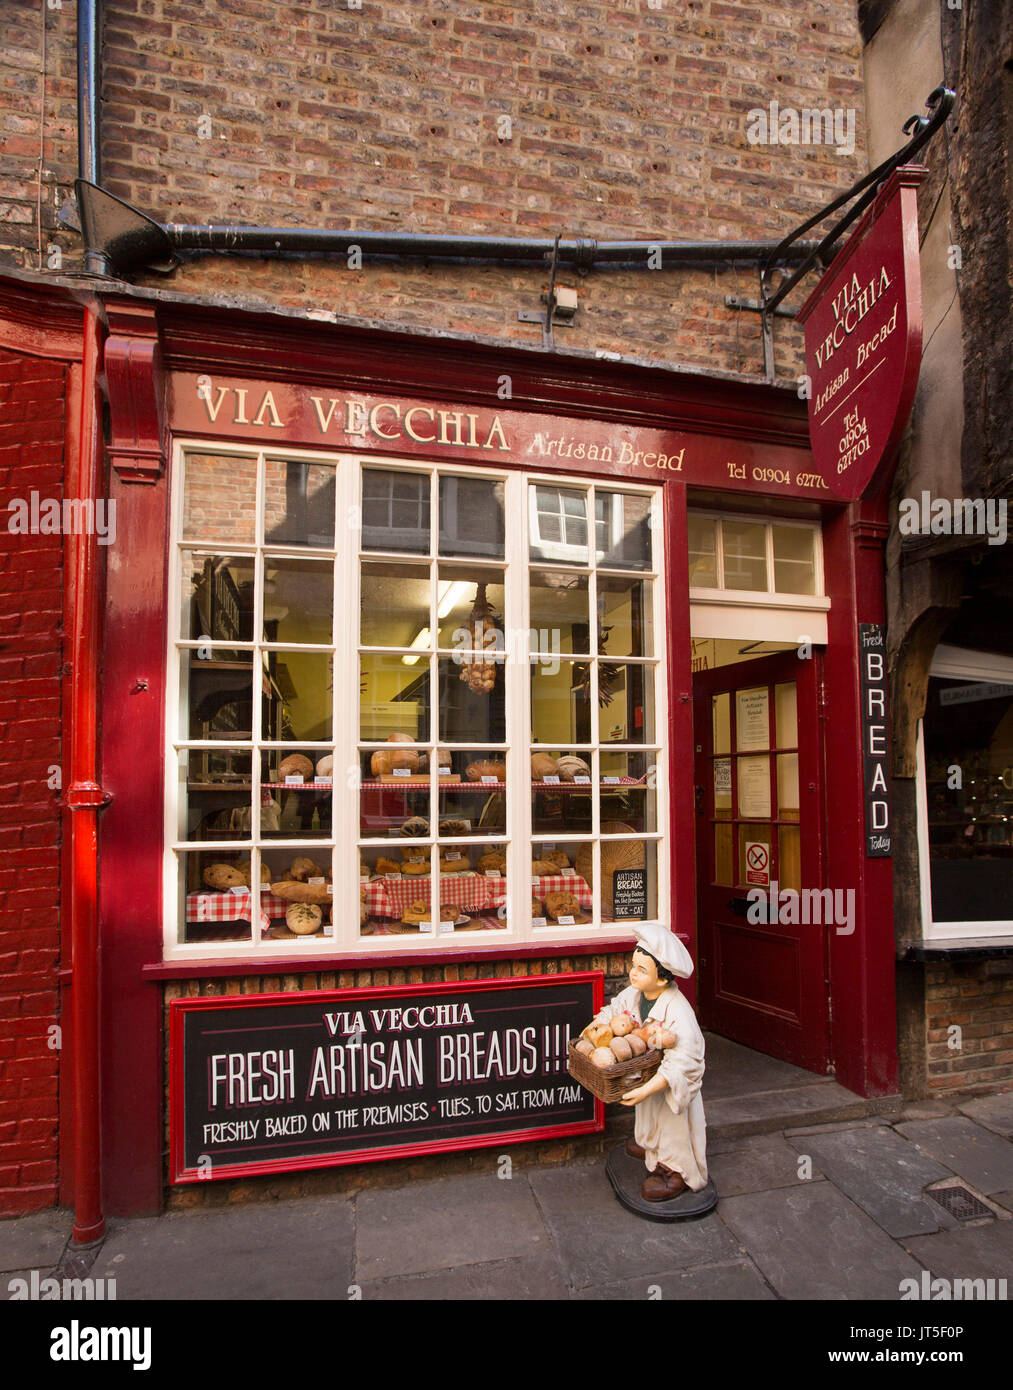 Bakery, Via Vecchia, building with red façade and display of artisan bread in window in York, England Stock Photo